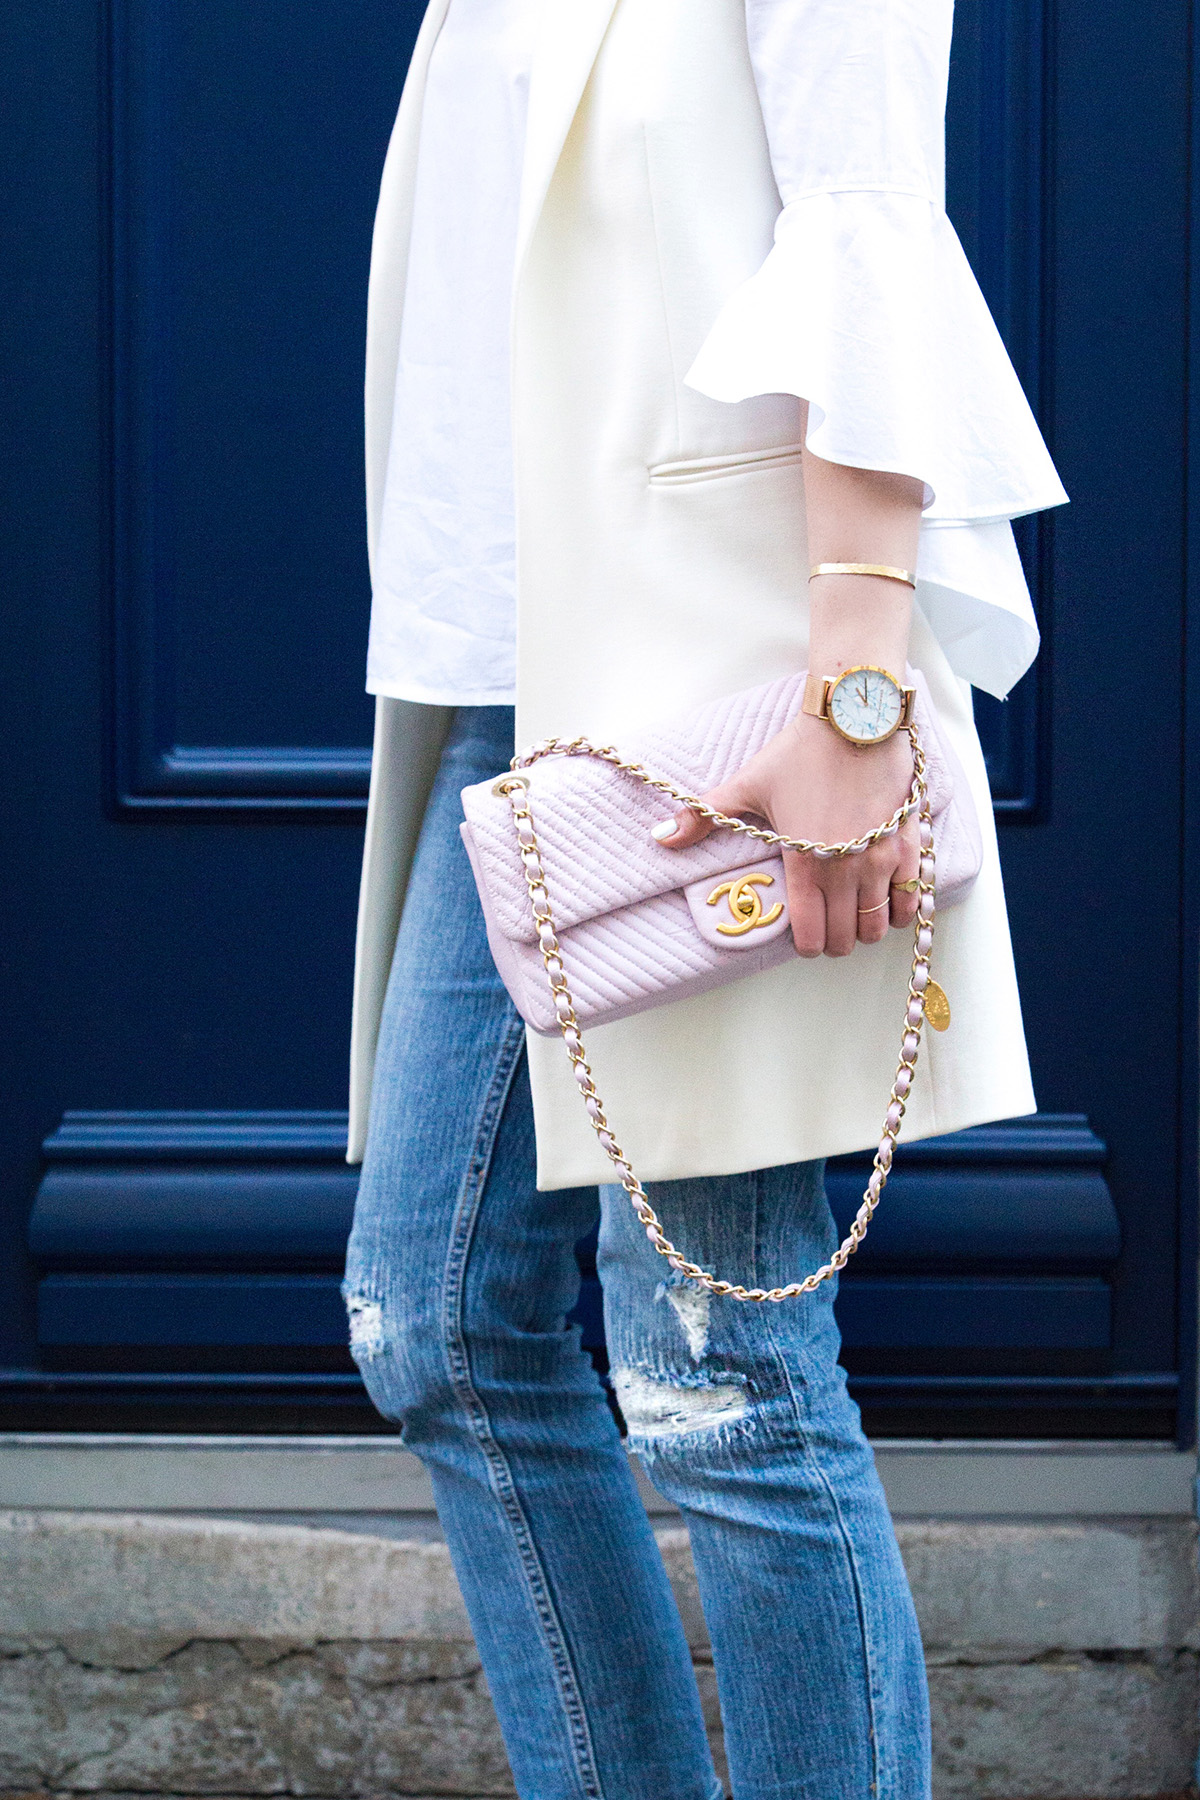 Stella Asteria wearing jeans and Chanel slingbacks, Chanel pink leather chevron bag